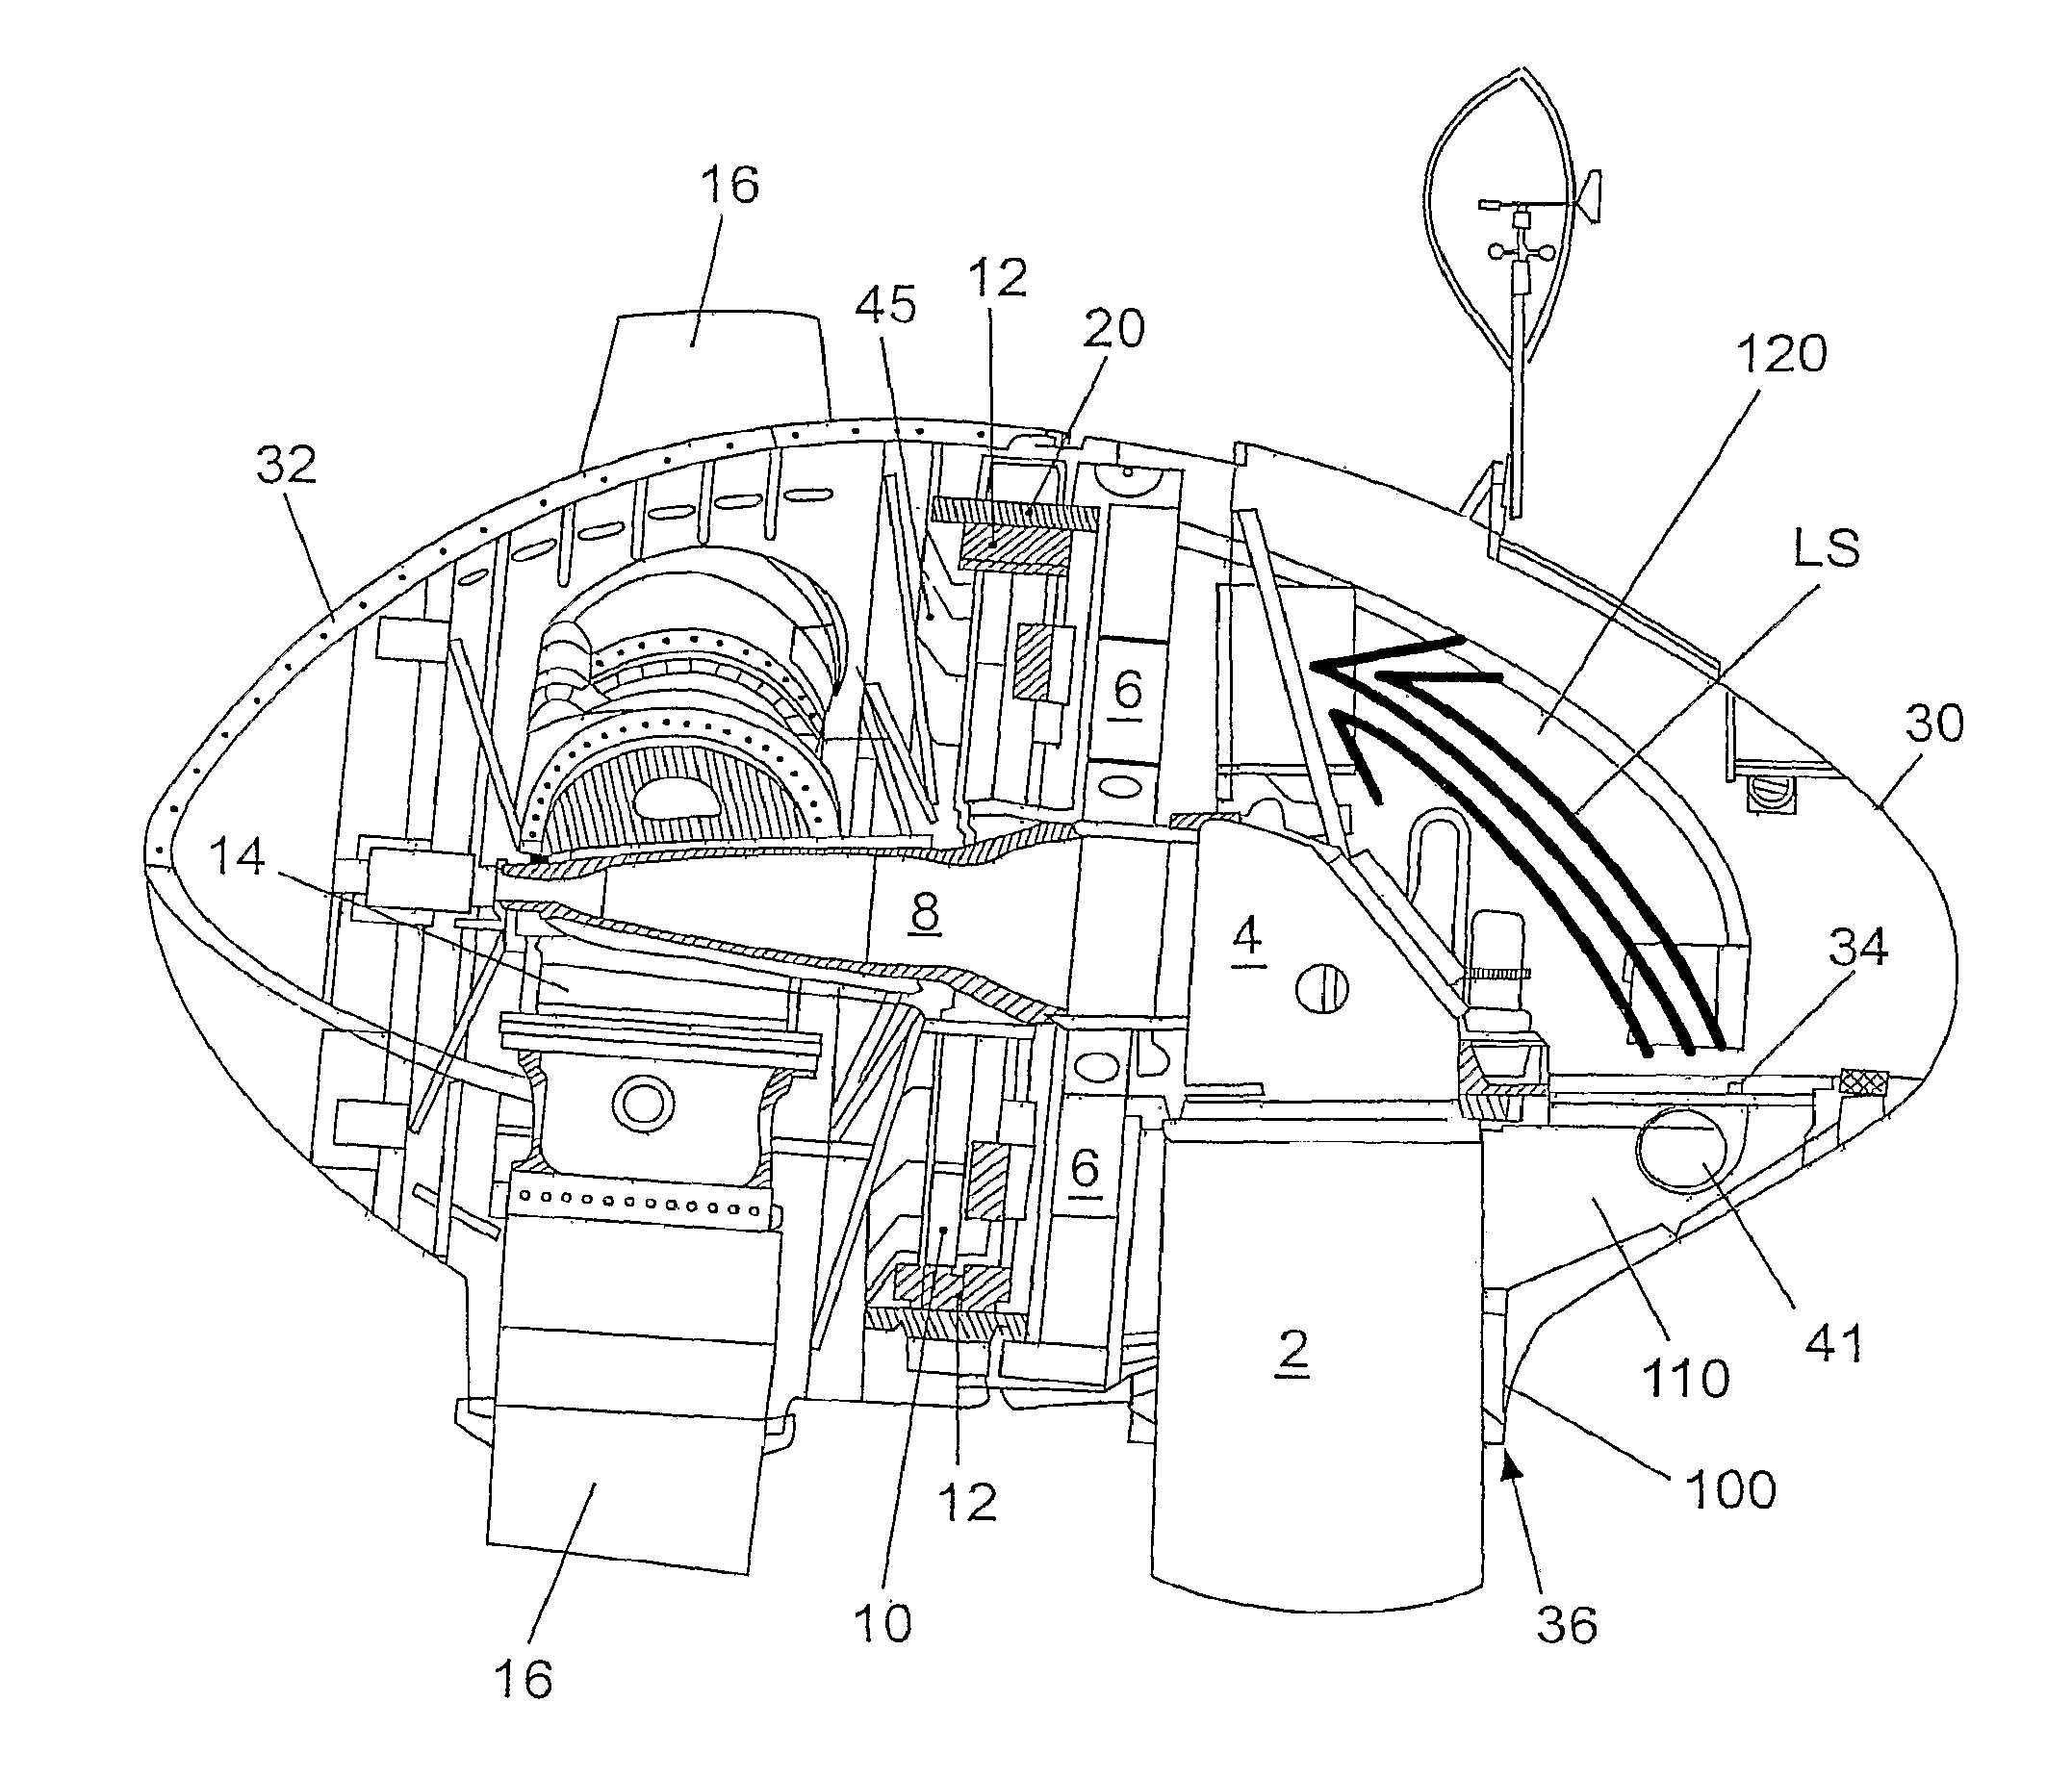 Wind turbine comprising a generator cooling system